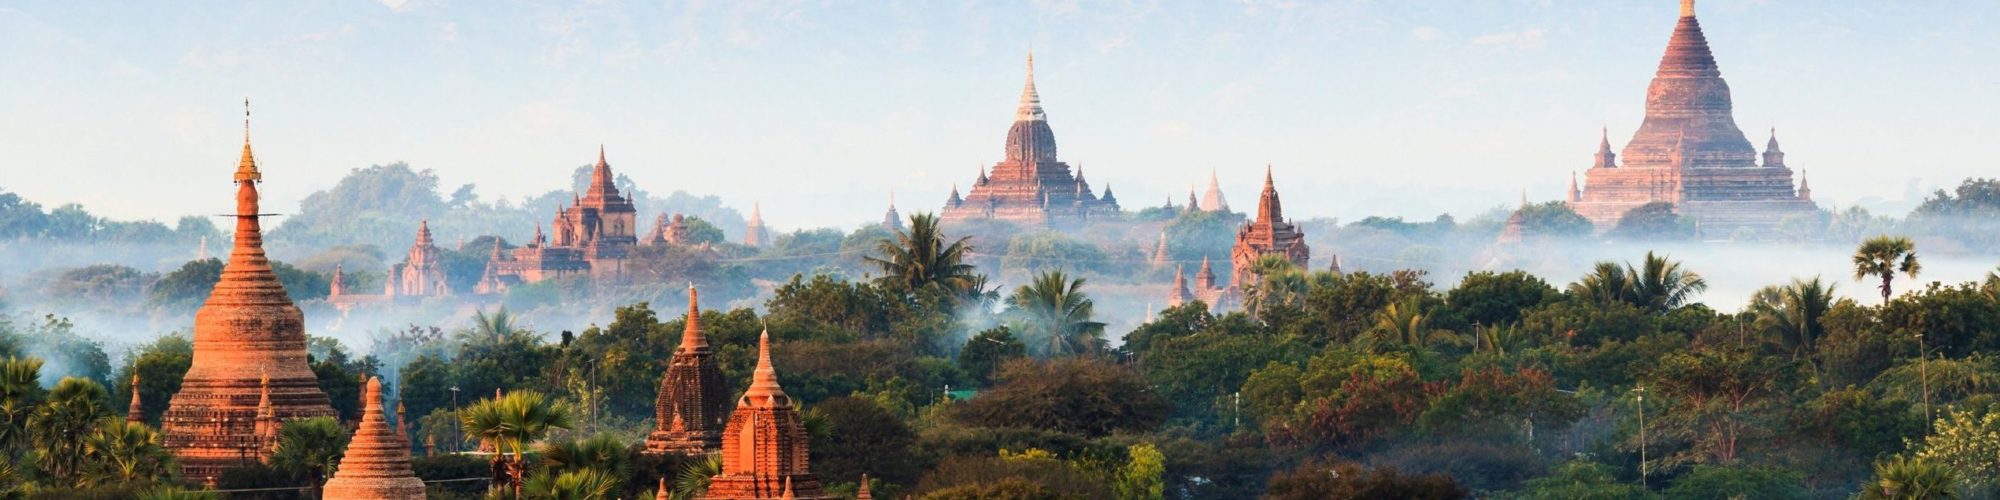 Bagan travel agents packages deals